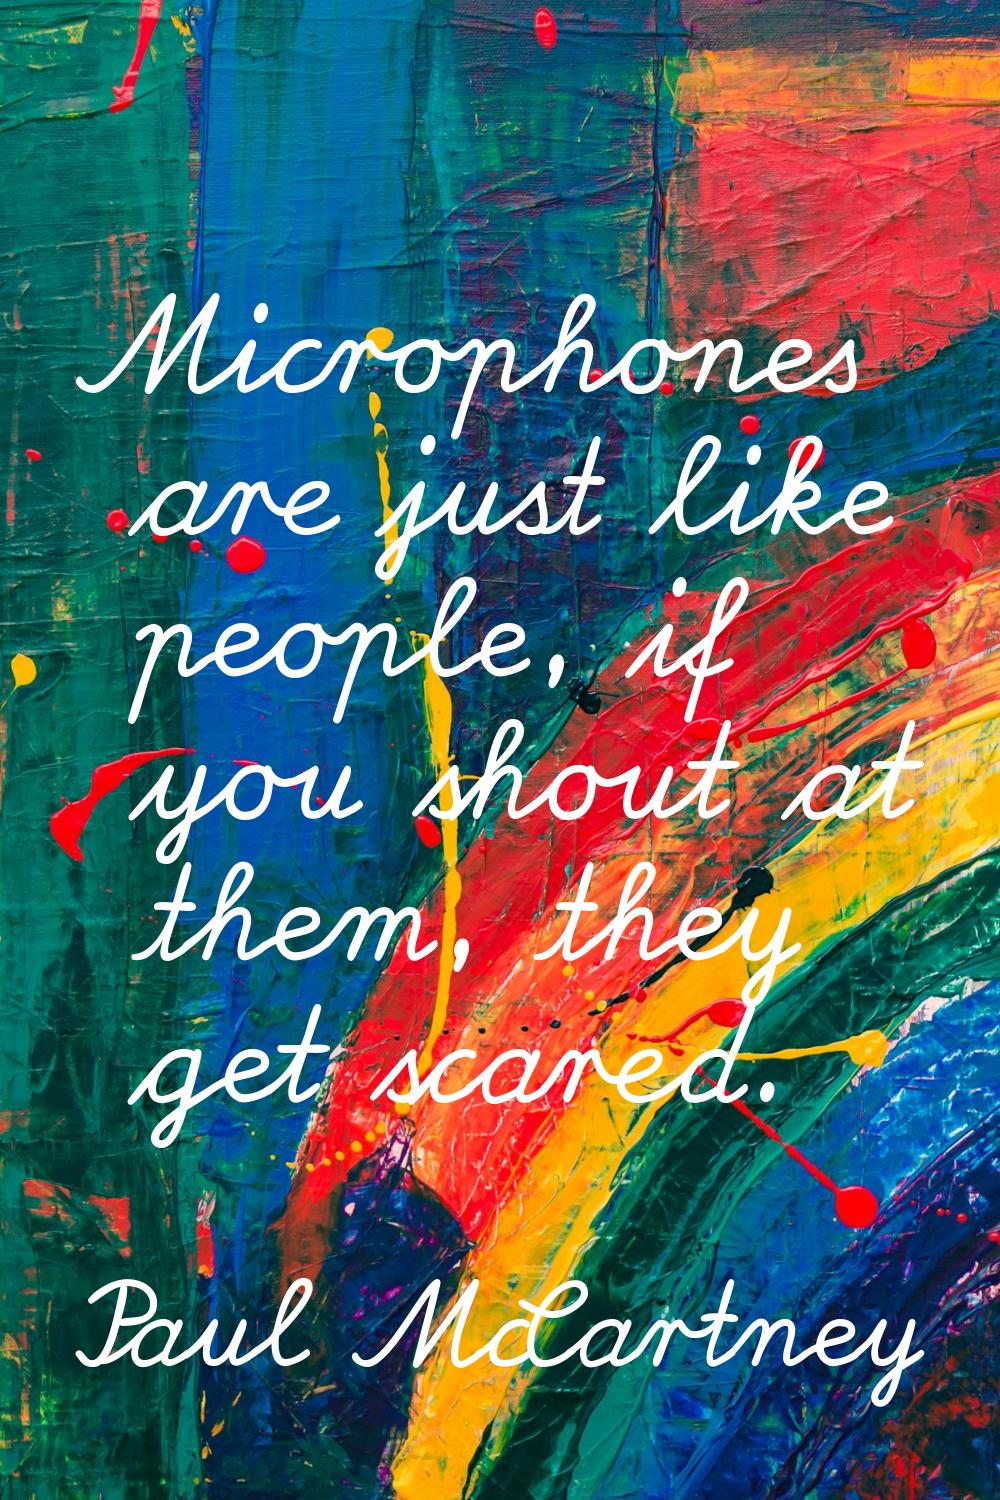 Microphones are just like people, if you shout at them, they get scared.